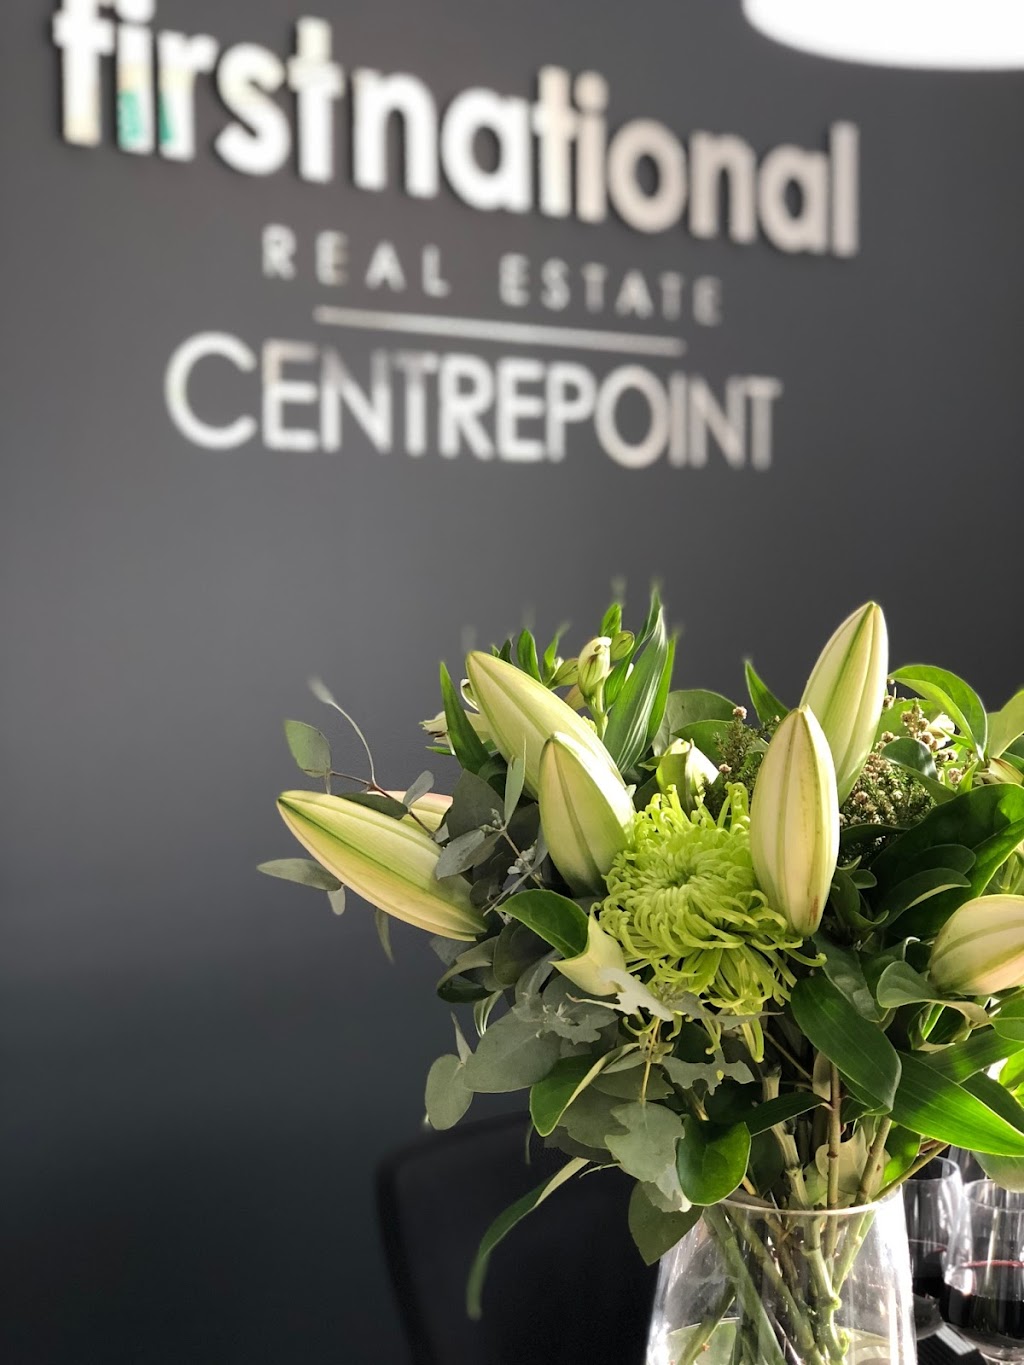 First National Real Estate Centrepoint | Q Super Centre Shop D2B, Cnr Markeri &, Southport Burleigh Rd, Mermaid Waters QLD 4218, Australia | Phone: (07) 5655 5666